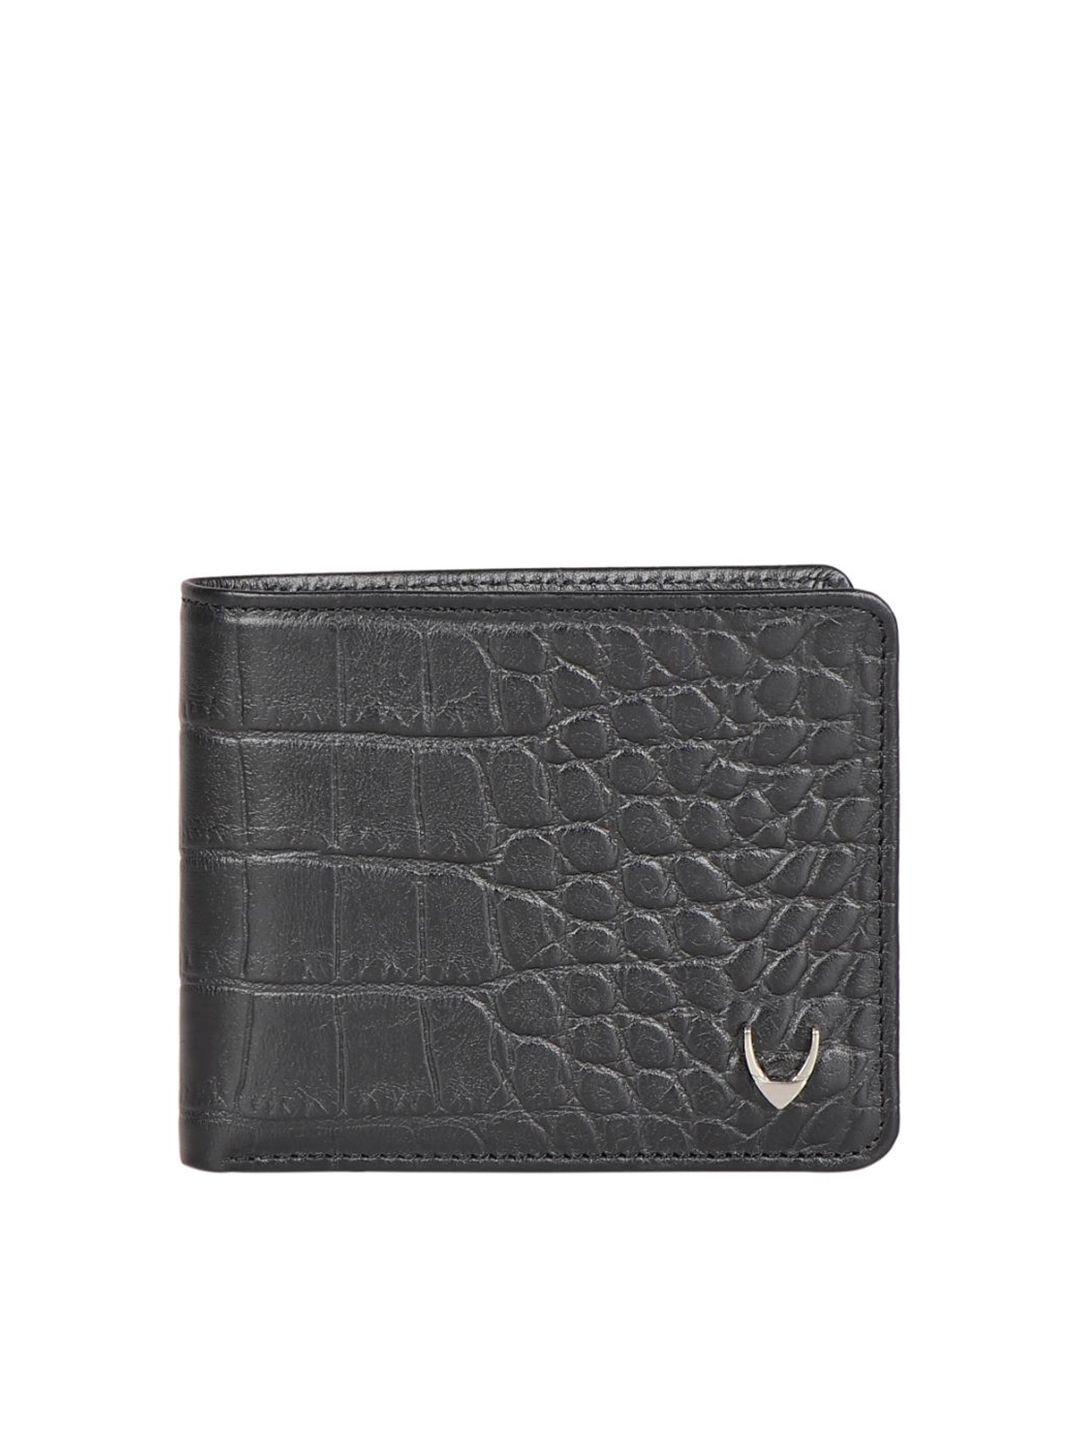 hidesign men animal textured leather two fold wallet